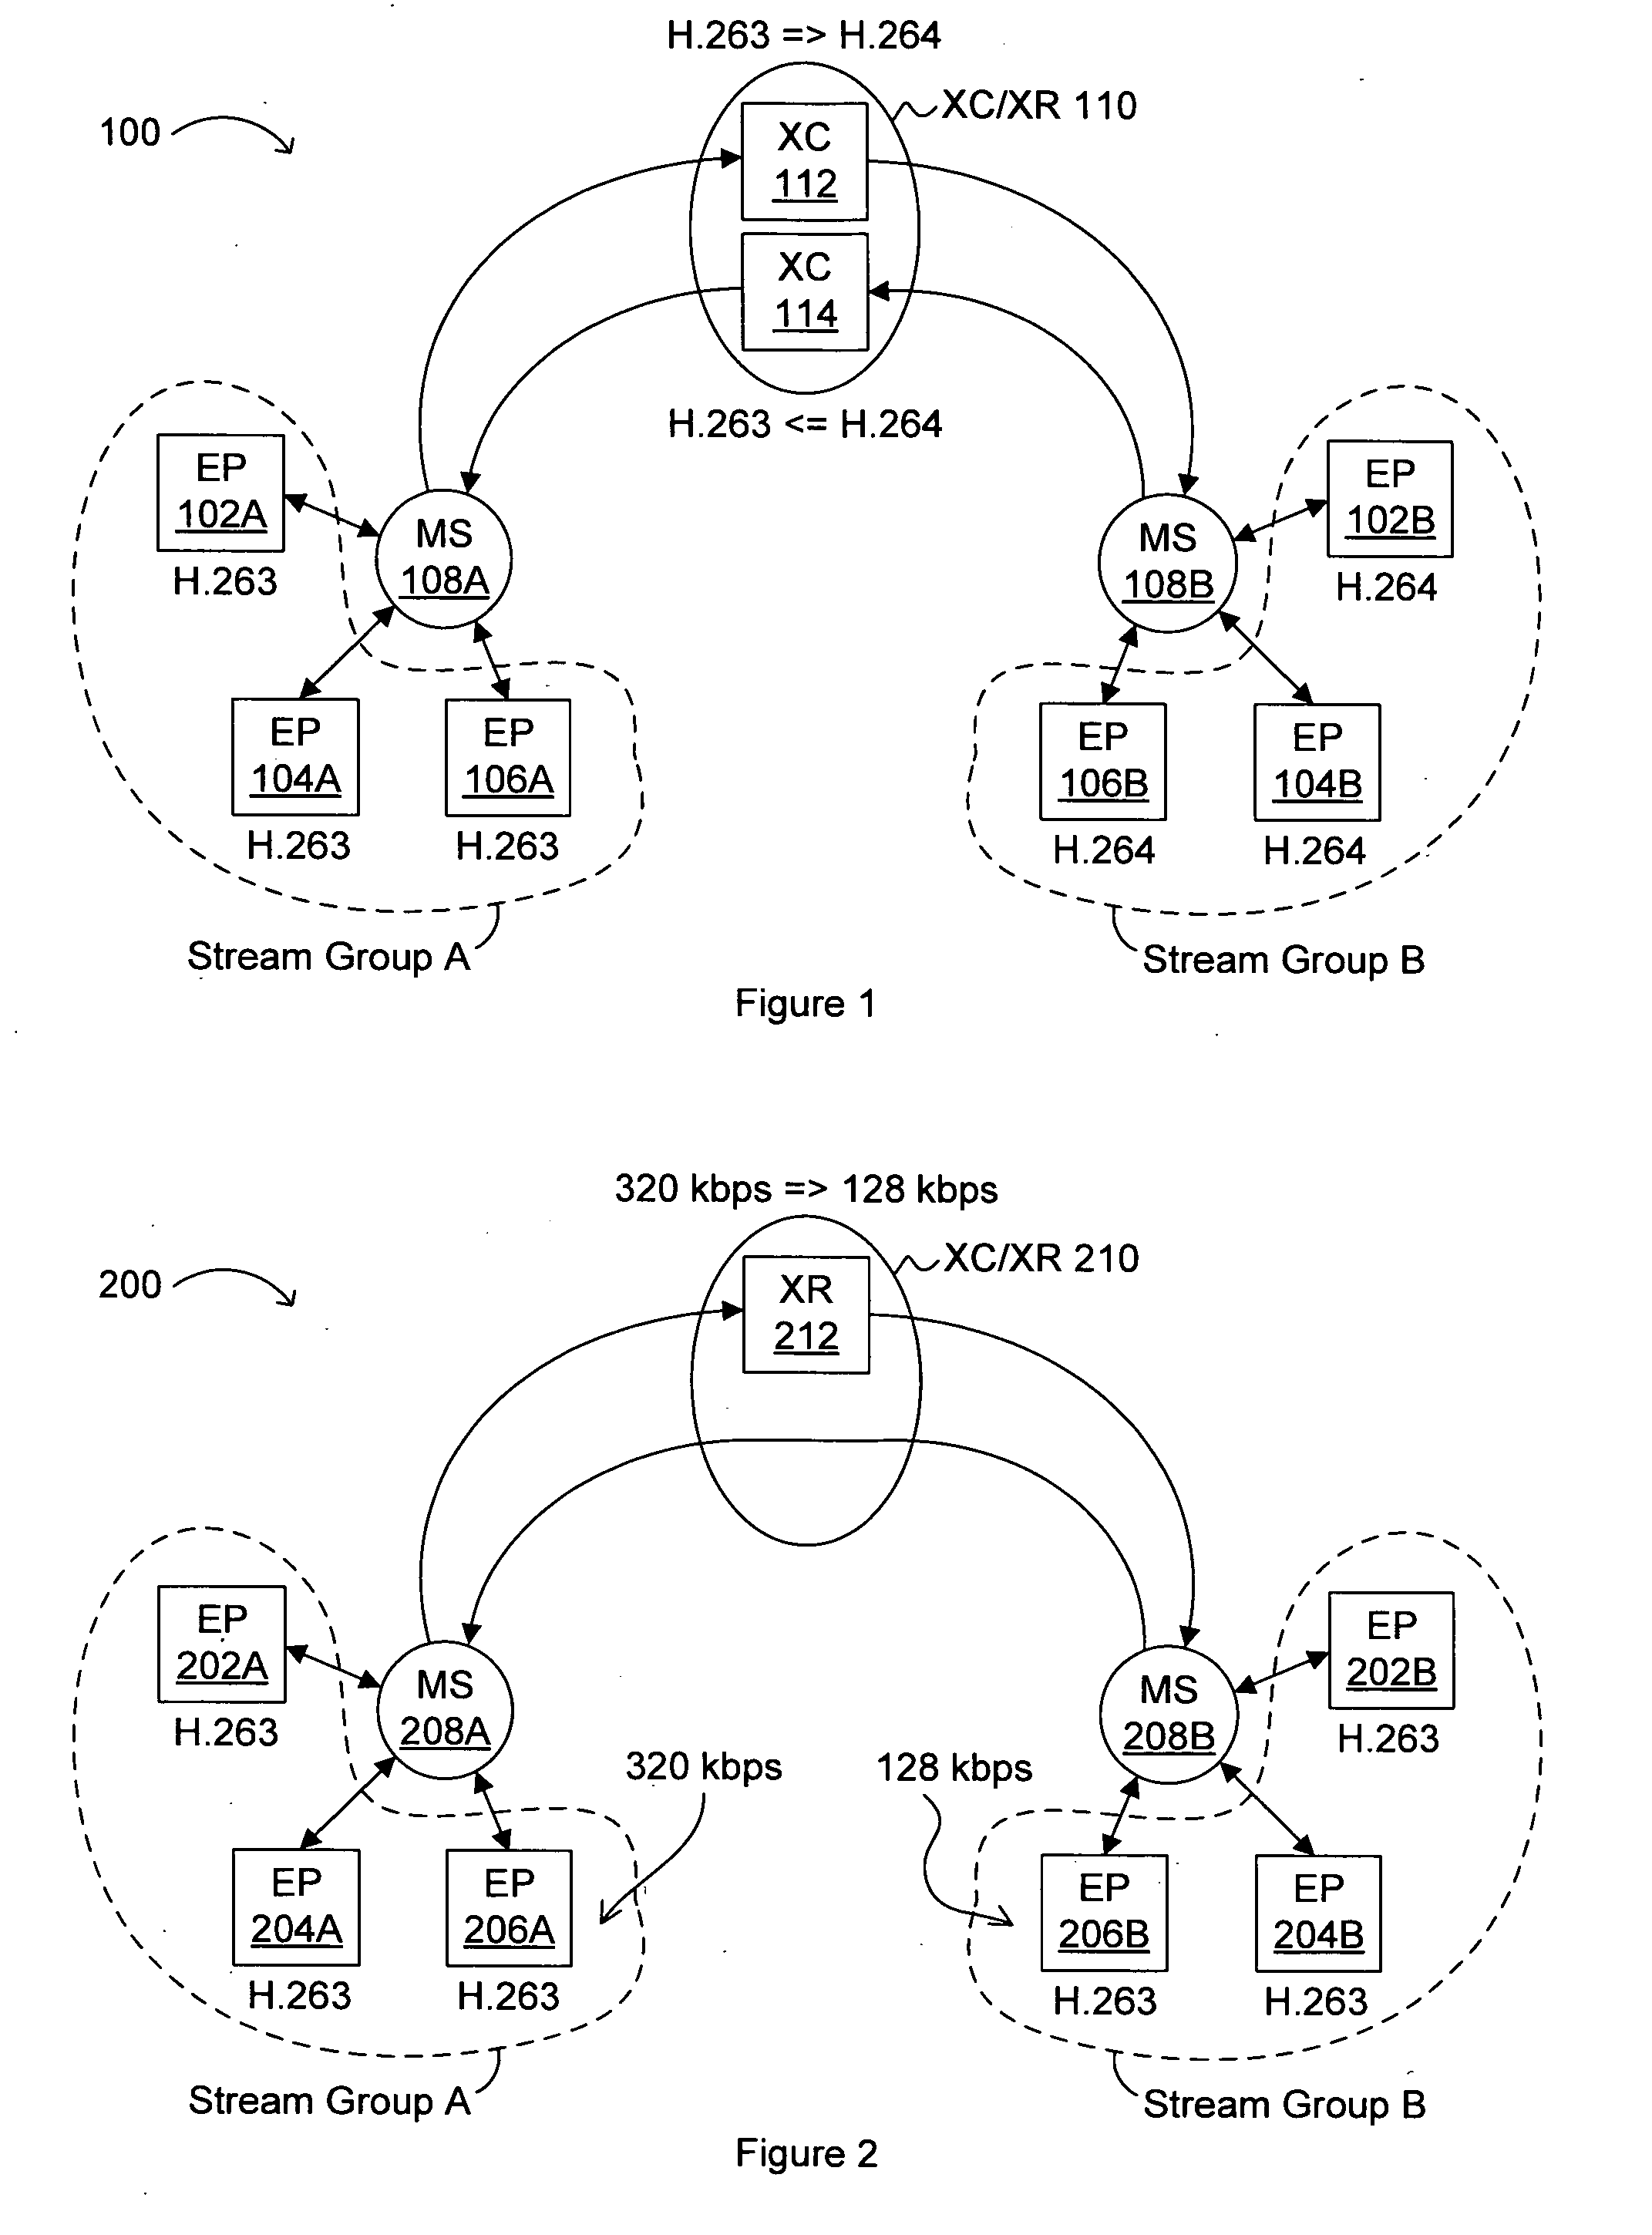 Method and apparatus for transcoding and transrating in distributed video systems